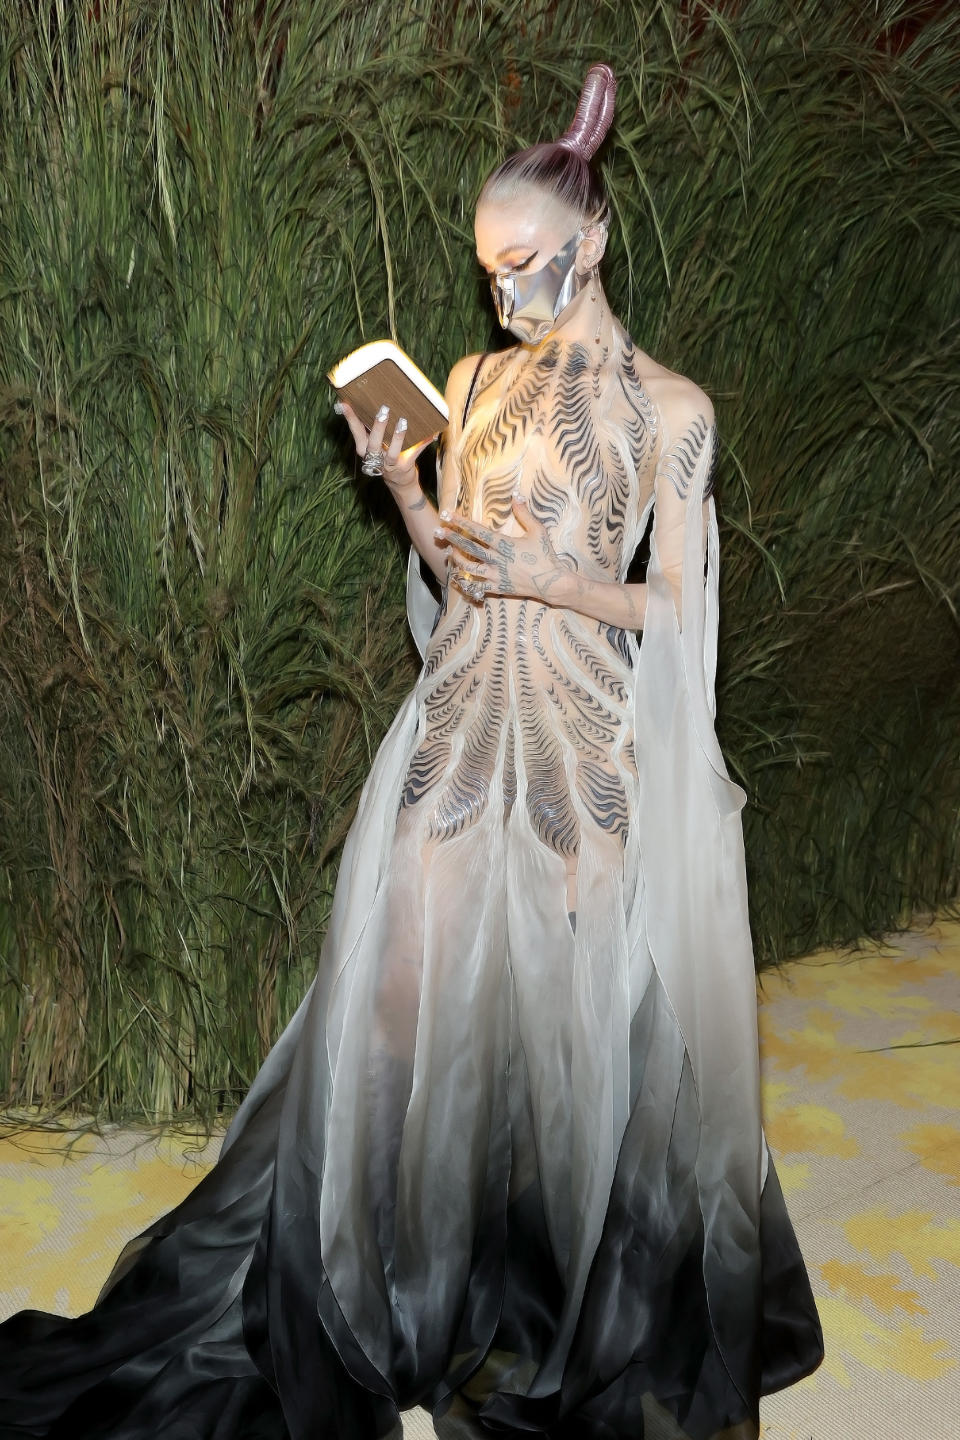 Grimes reads from the book, which is glowing with light